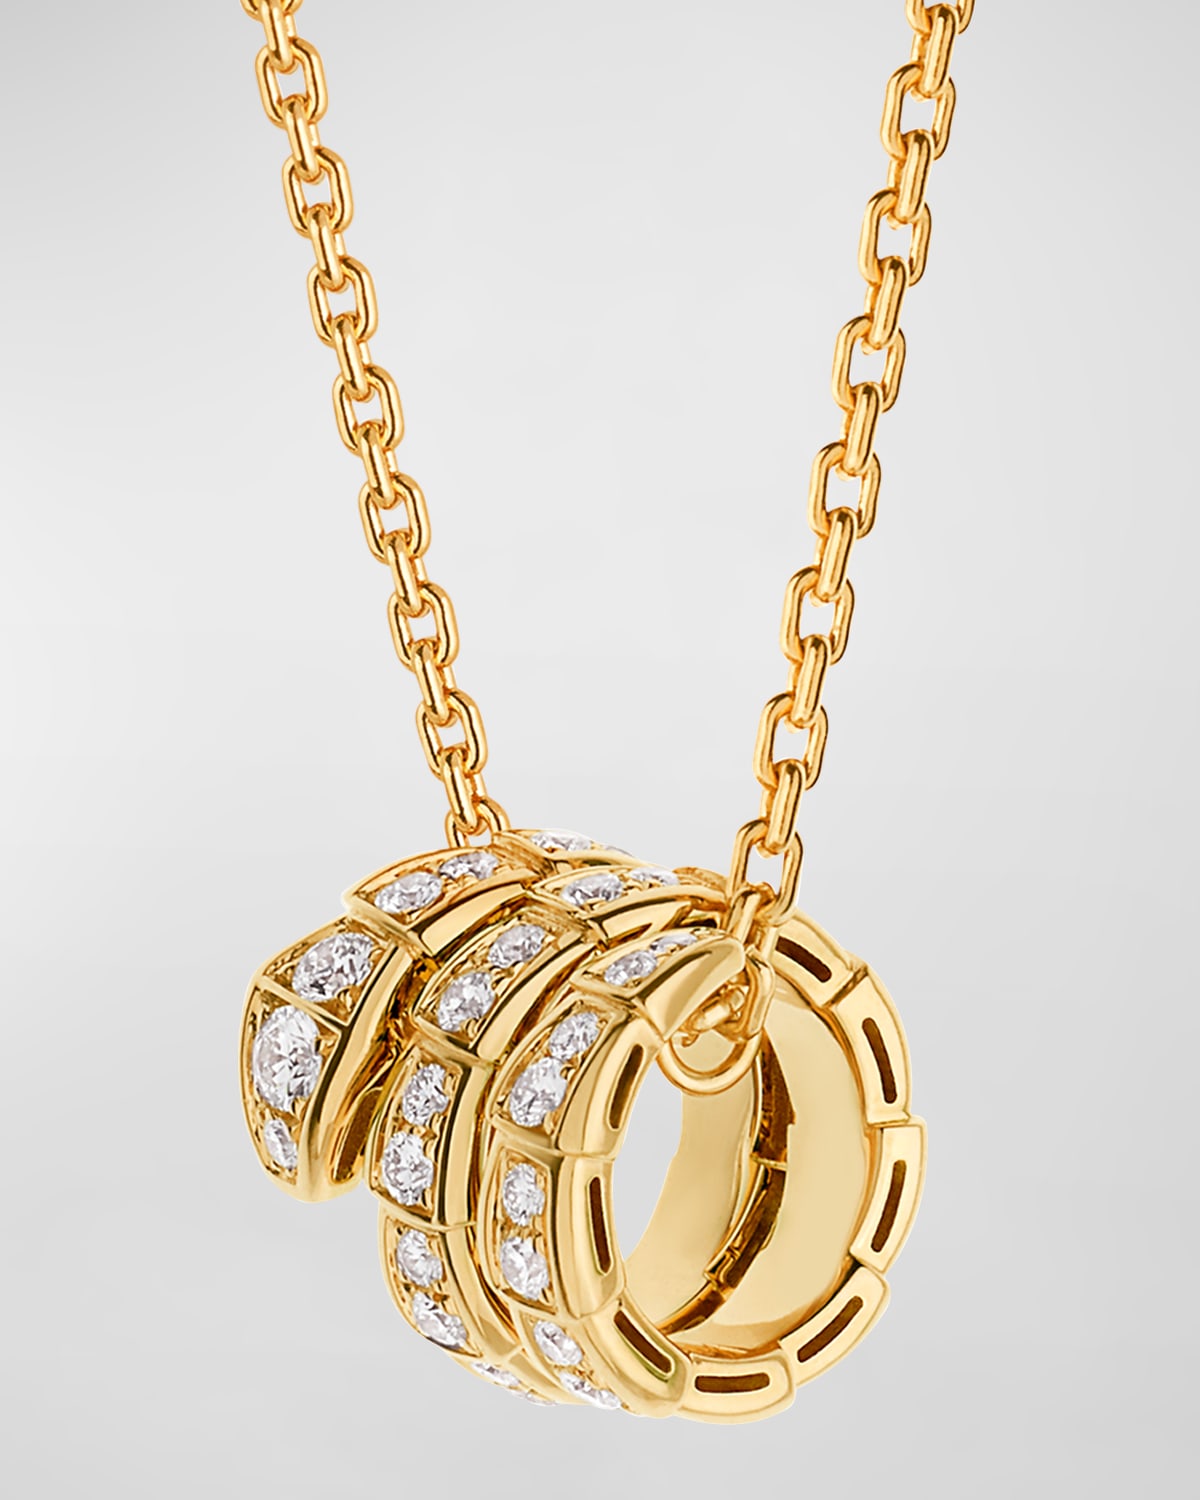 Serpenti Viper Necklace in 18k Yellow Gold with Full Diamond Pave